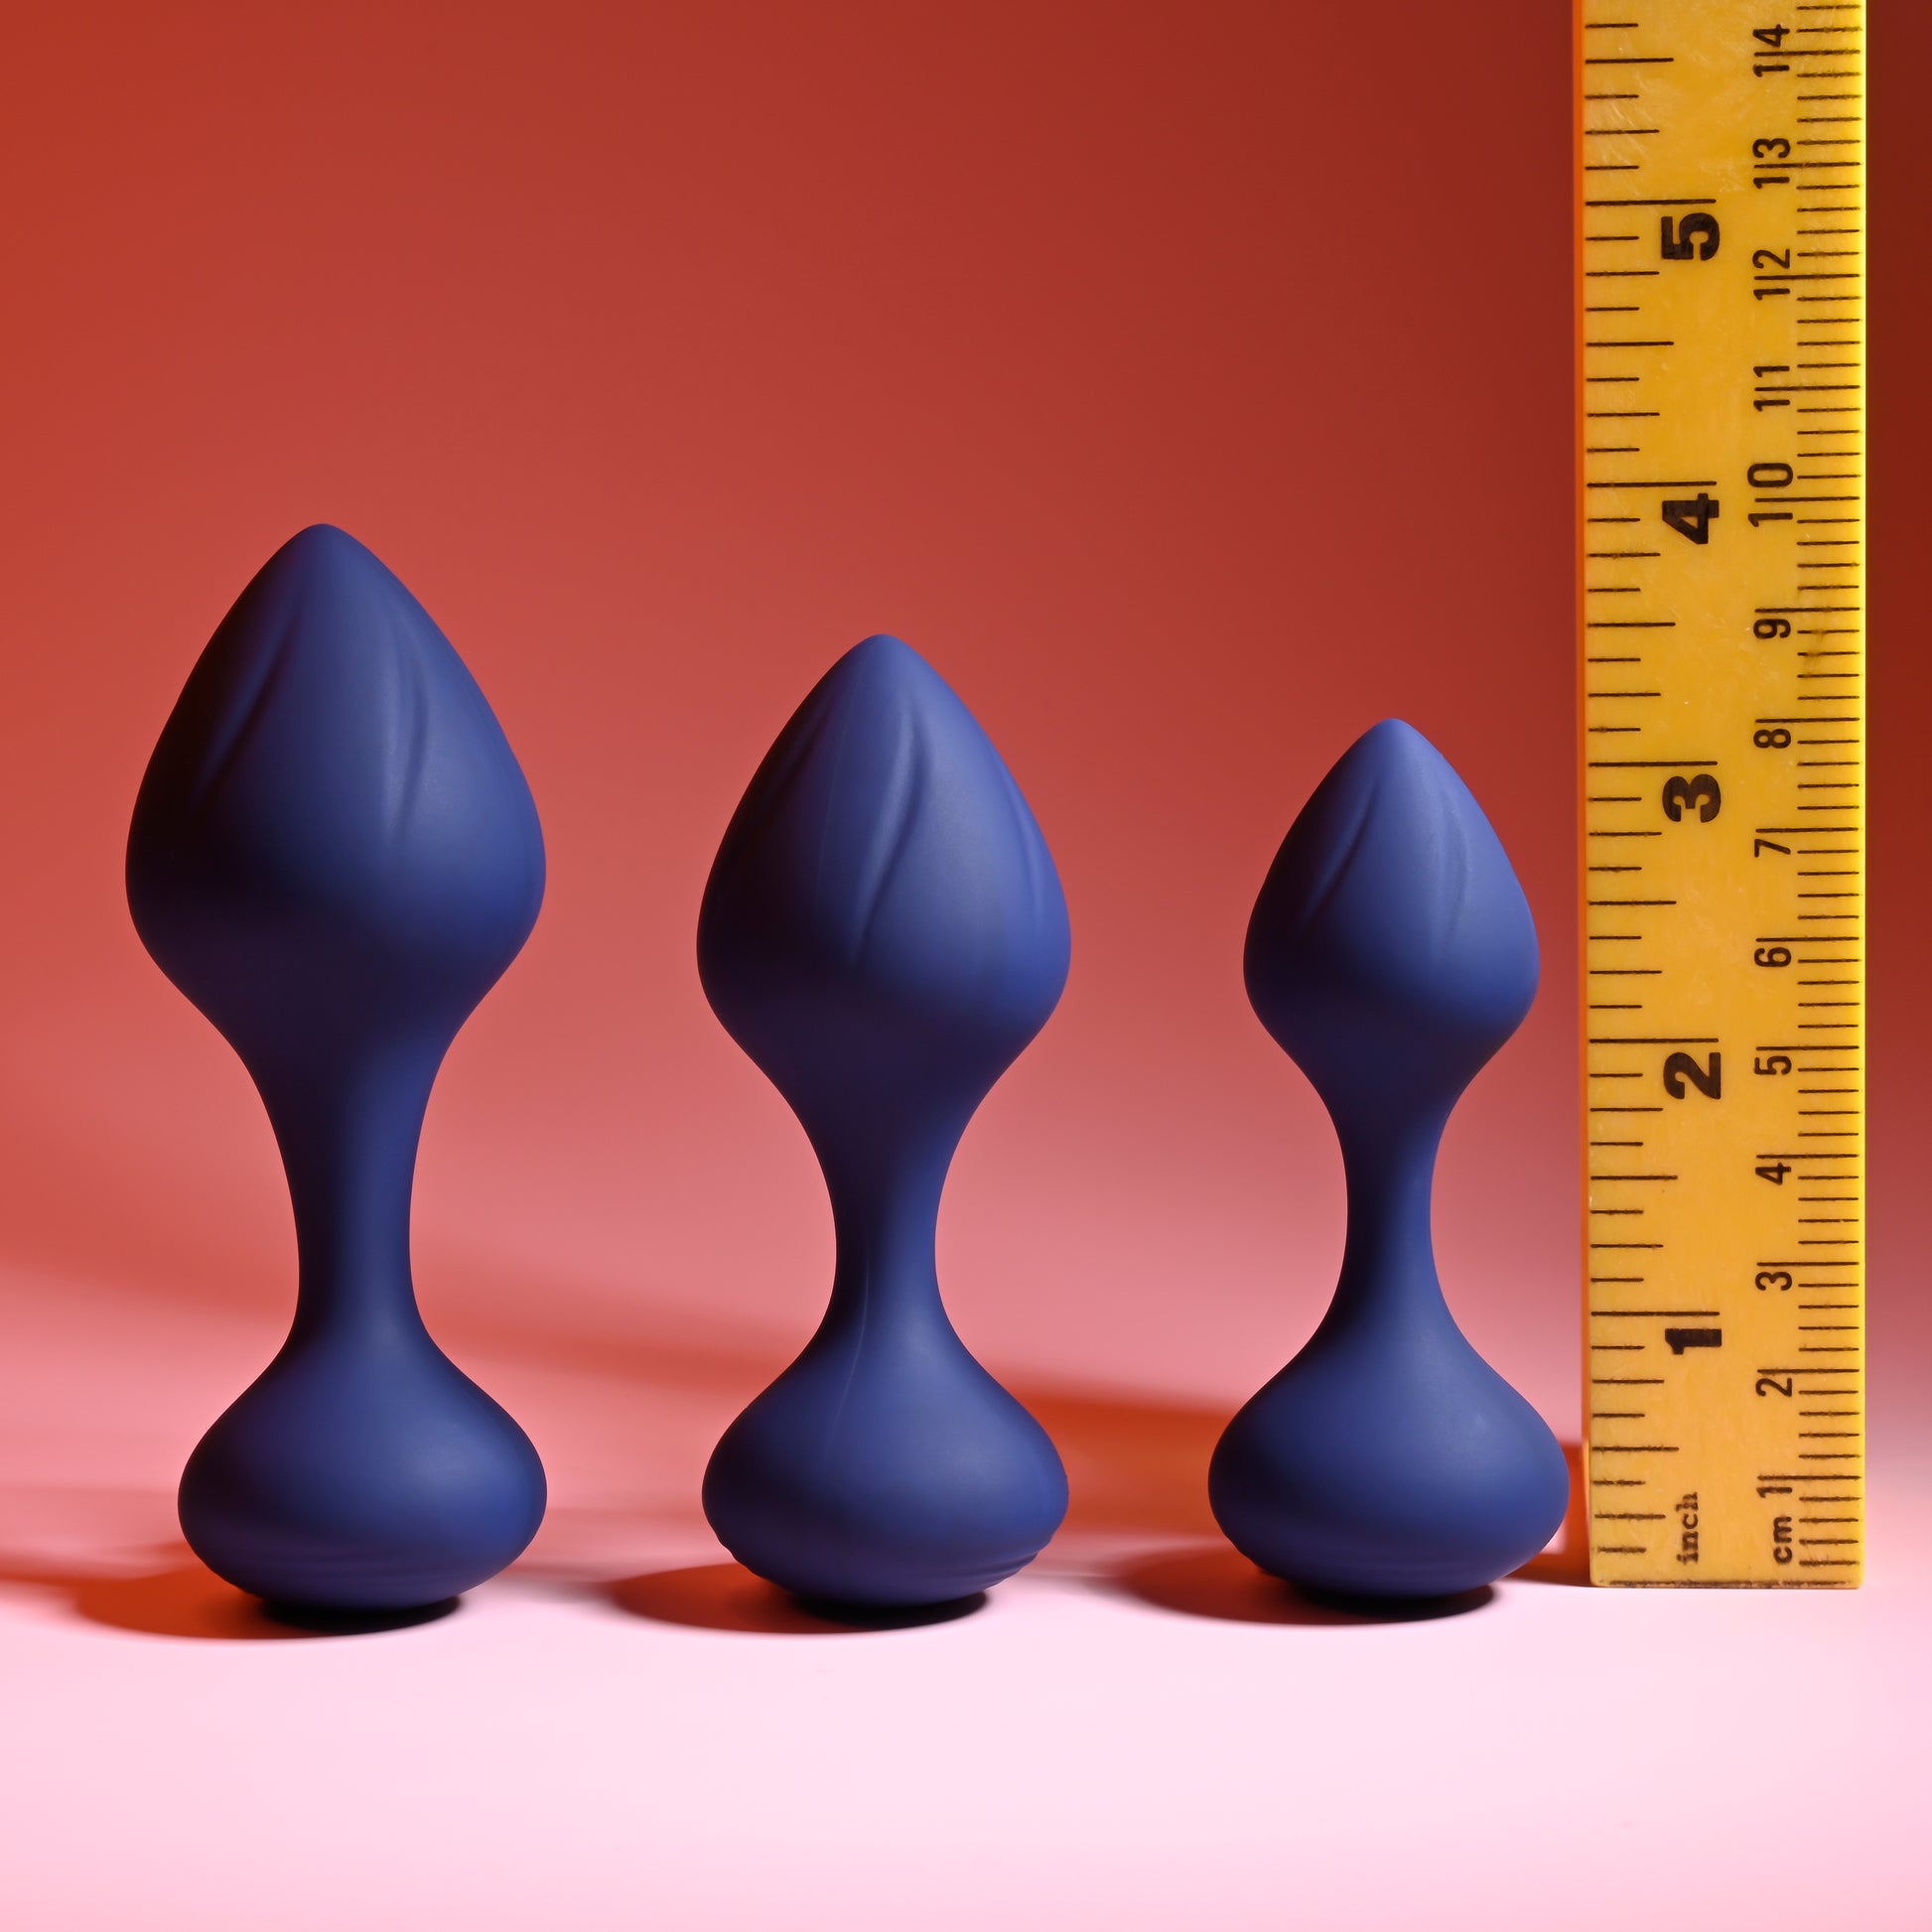 Playboy Tail Trainer 3-Piece Silicone Anal Training Kit